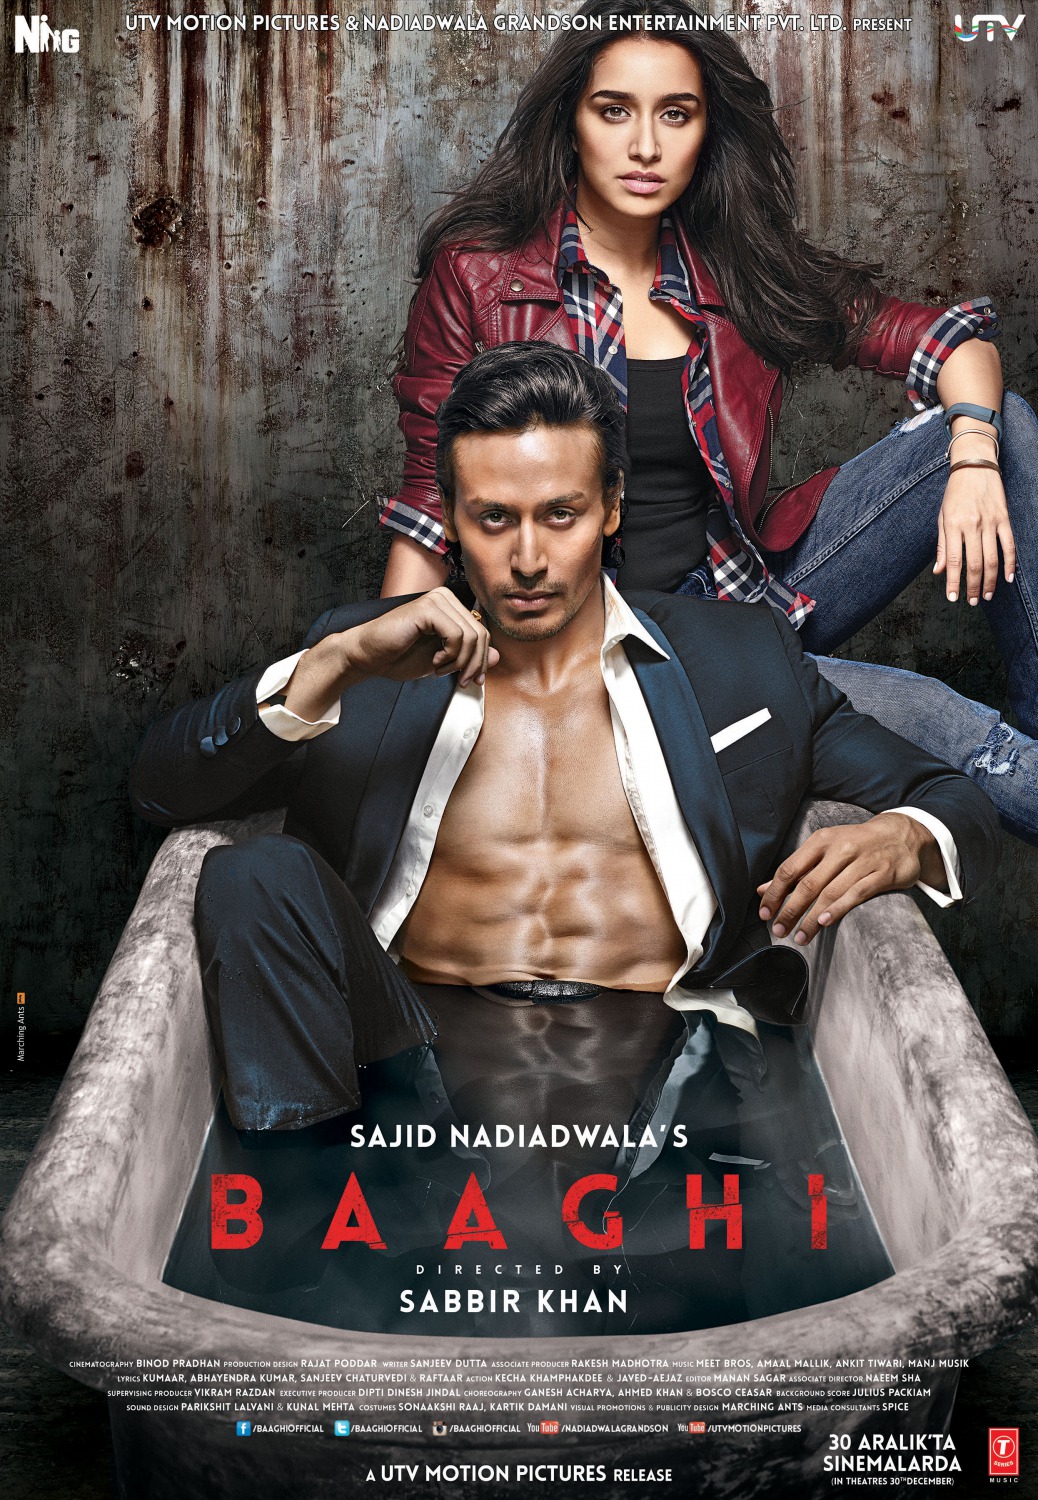 Extra Large Movie Poster Image for Baaghi (#1 of 7)